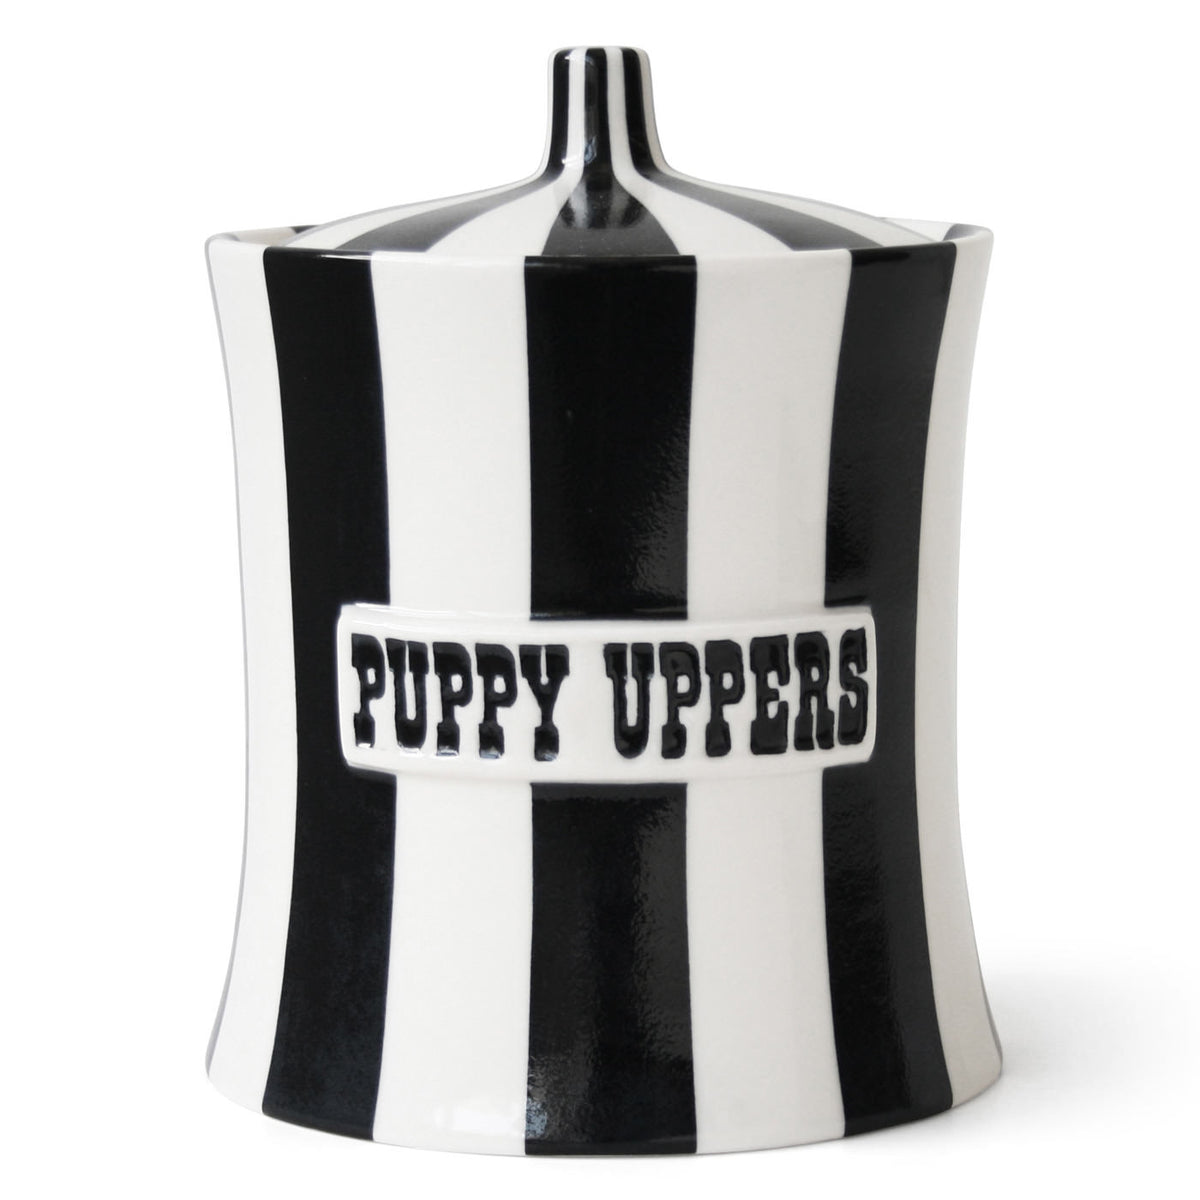 Vice Puppy Uppers by Jonathan Adler